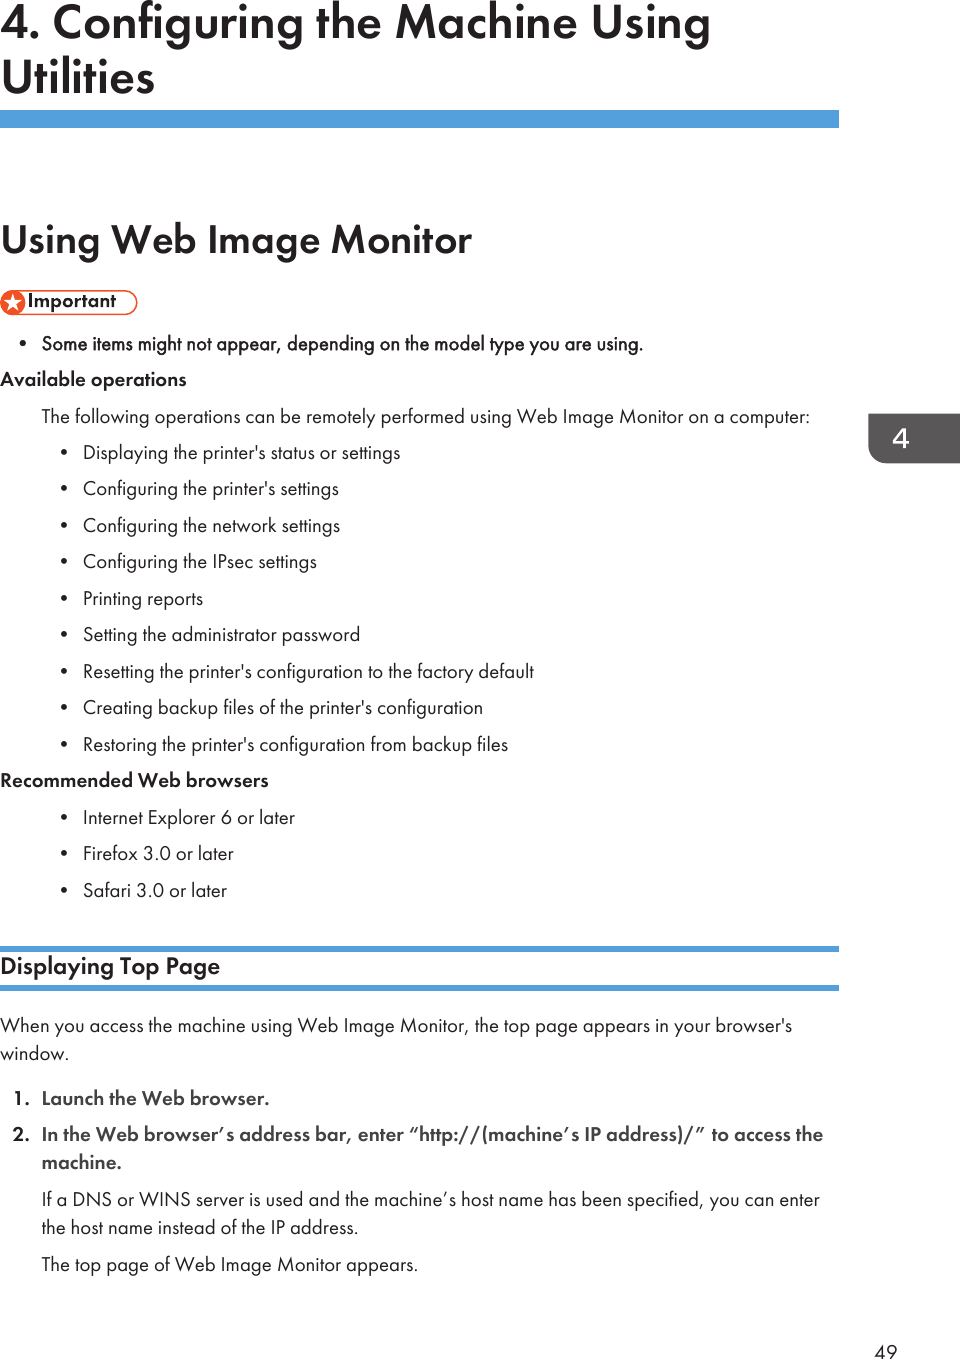 4. Configuring the Machine UsingUtilitiesUsing Web Image Monitor• Some items might not appear, depending on the model type you are using.Available operationsThe following operations can be remotely performed using Web Image Monitor on a computer:• Displaying the printer&apos;s status or settings• Configuring the printer&apos;s settings• Configuring the network settings• Configuring the IPsec settings• Printing reports• Setting the administrator password• Resetting the printer&apos;s configuration to the factory default• Creating backup files of the printer&apos;s configuration• Restoring the printer&apos;s configuration from backup filesRecommended Web browsers• Internet Explorer 6 or later• Firefox 3.0 or later• Safari 3.0 or laterDisplaying Top PageWhen you access the machine using Web Image Monitor, the top page appears in your browser&apos;swindow.1. Launch the Web browser.2. In the Web browser’s address bar, enter “http://(machine’s IP address)/” to access themachine.If a DNS or WINS server is used and the machine’s host name has been specified, you can enterthe host name instead of the IP address.The top page of Web Image Monitor appears.49